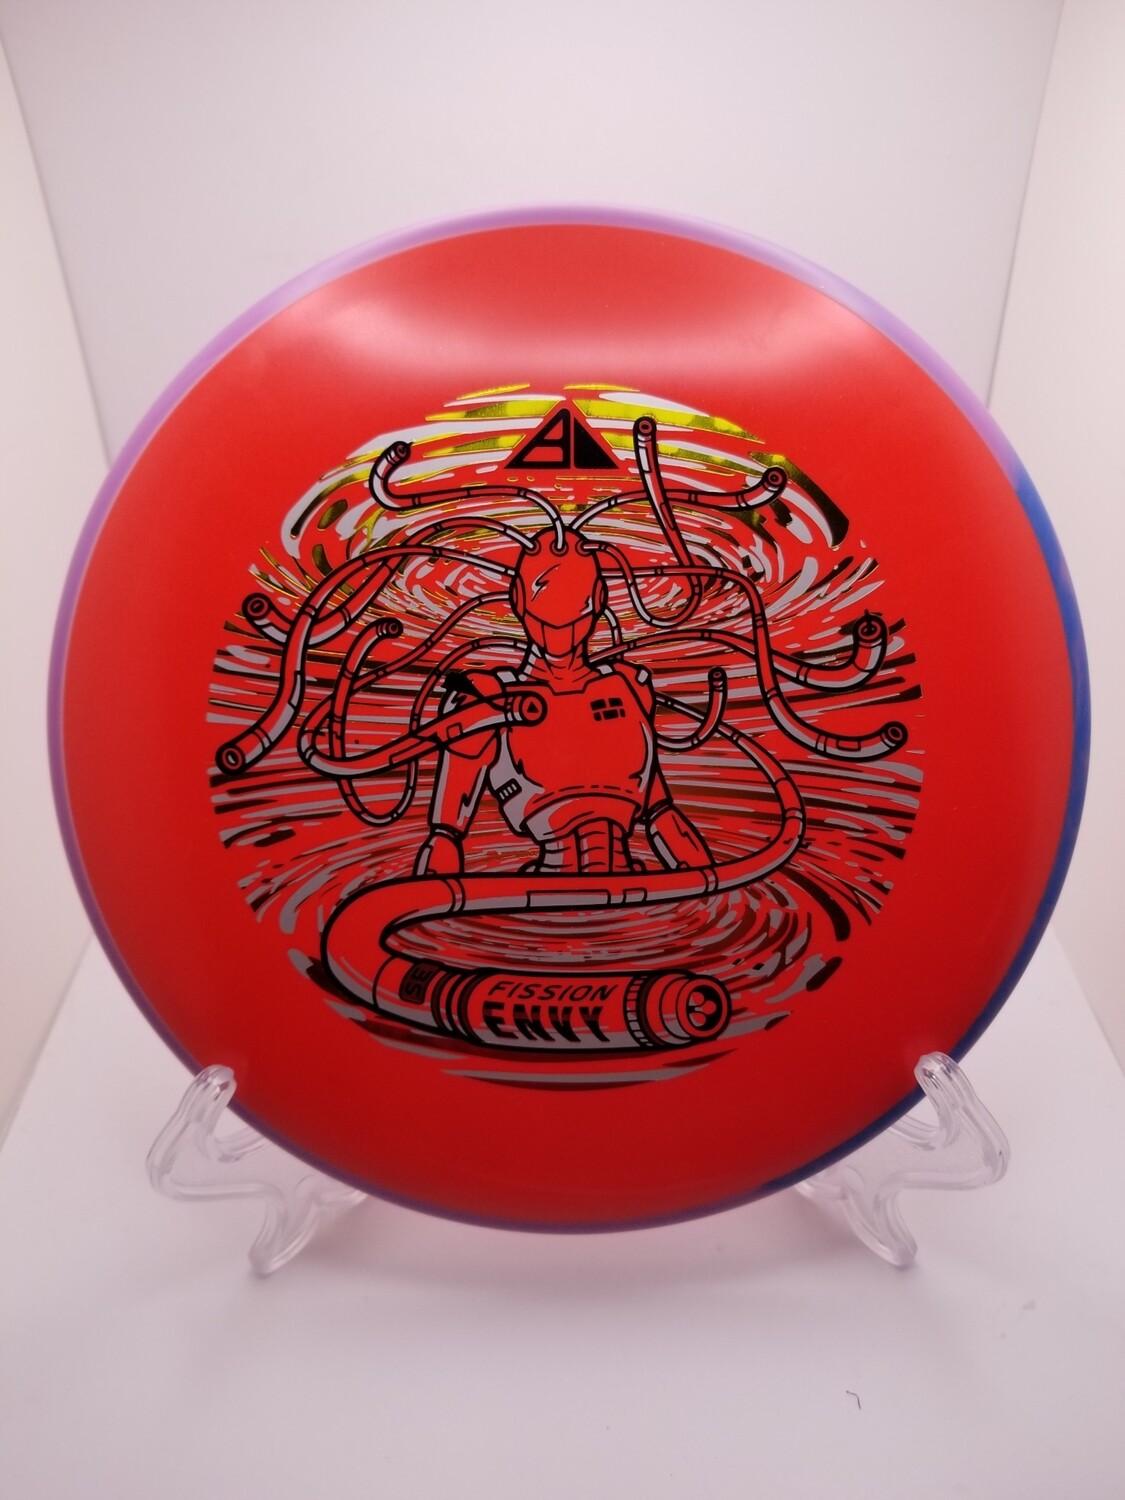 Axiom Discs Envy Special Edition Fission Envy Red with Swirl Purple/blue Rim171g